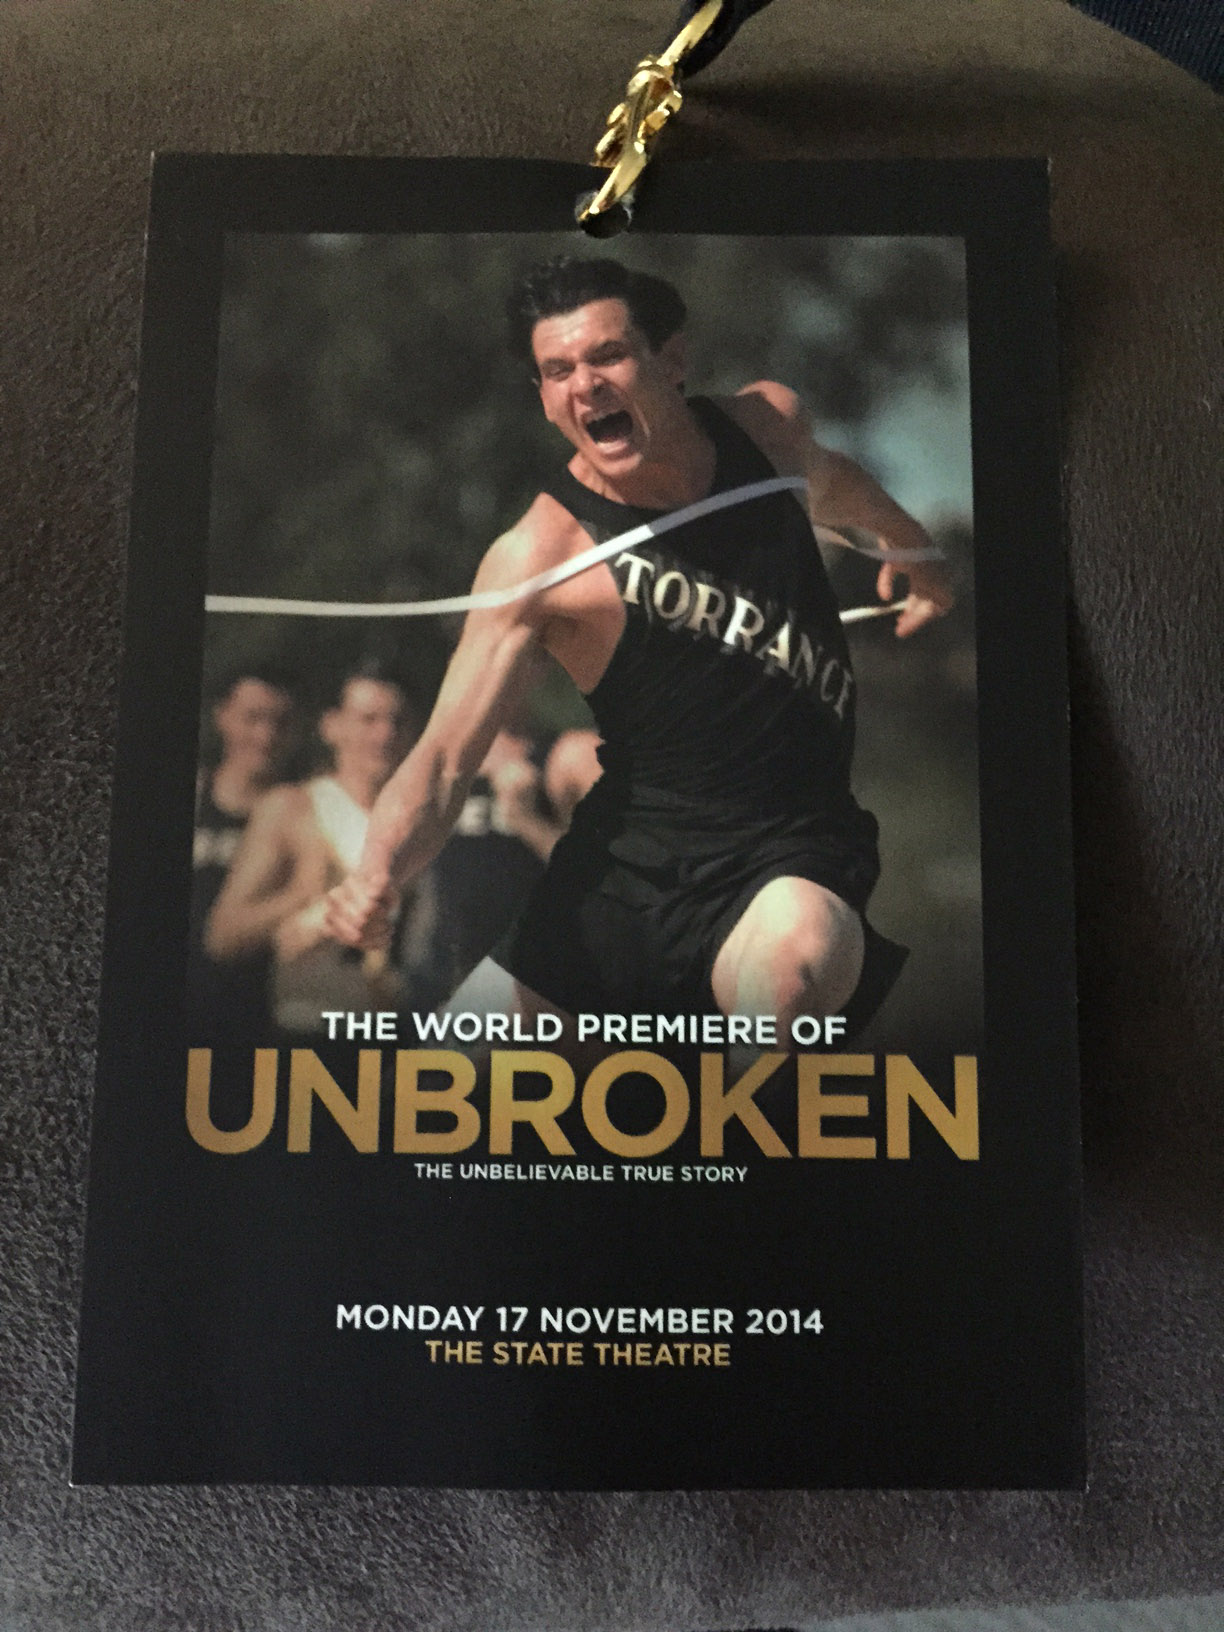 My red carpet pass to the world premiere of Unbroken in Sydney Australia.